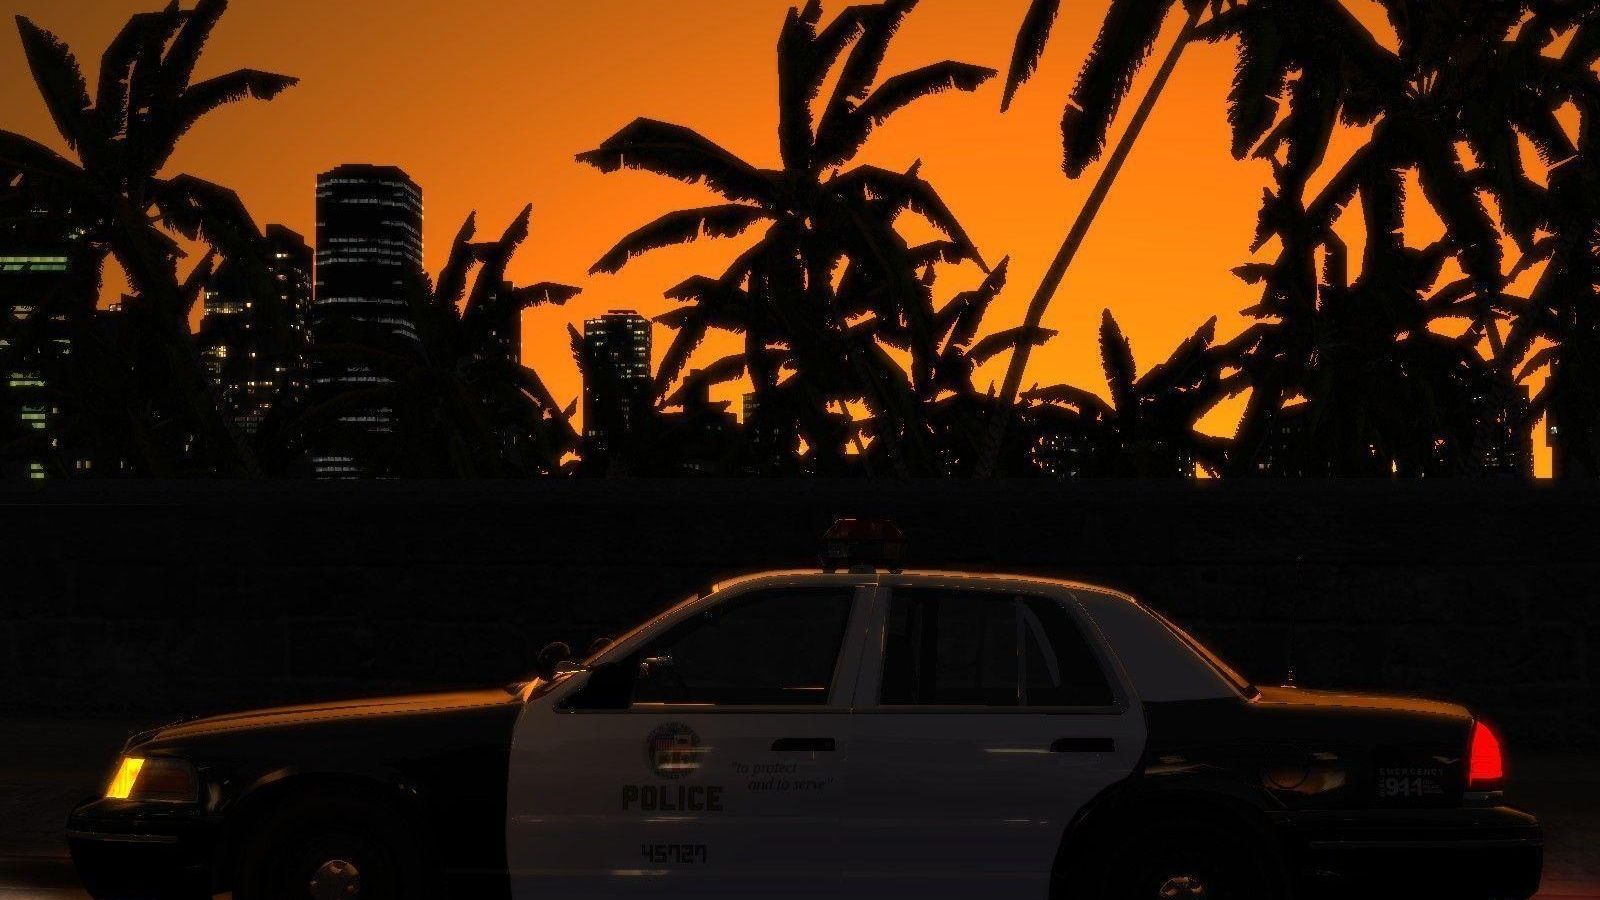 Lapd Wallpapers